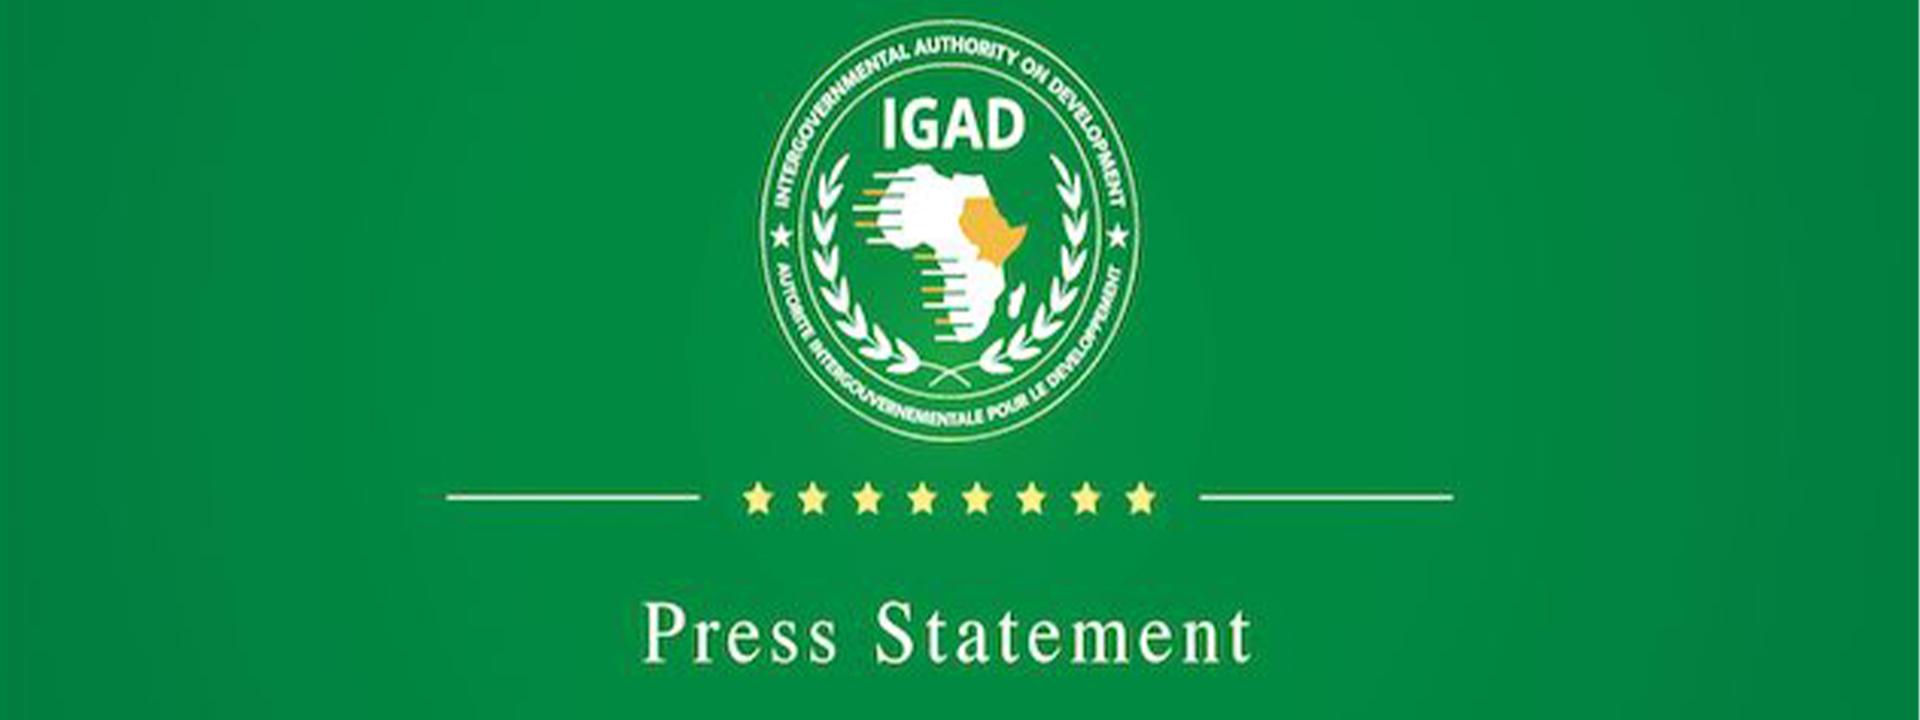 IGAD Summit of Heads of State and Government